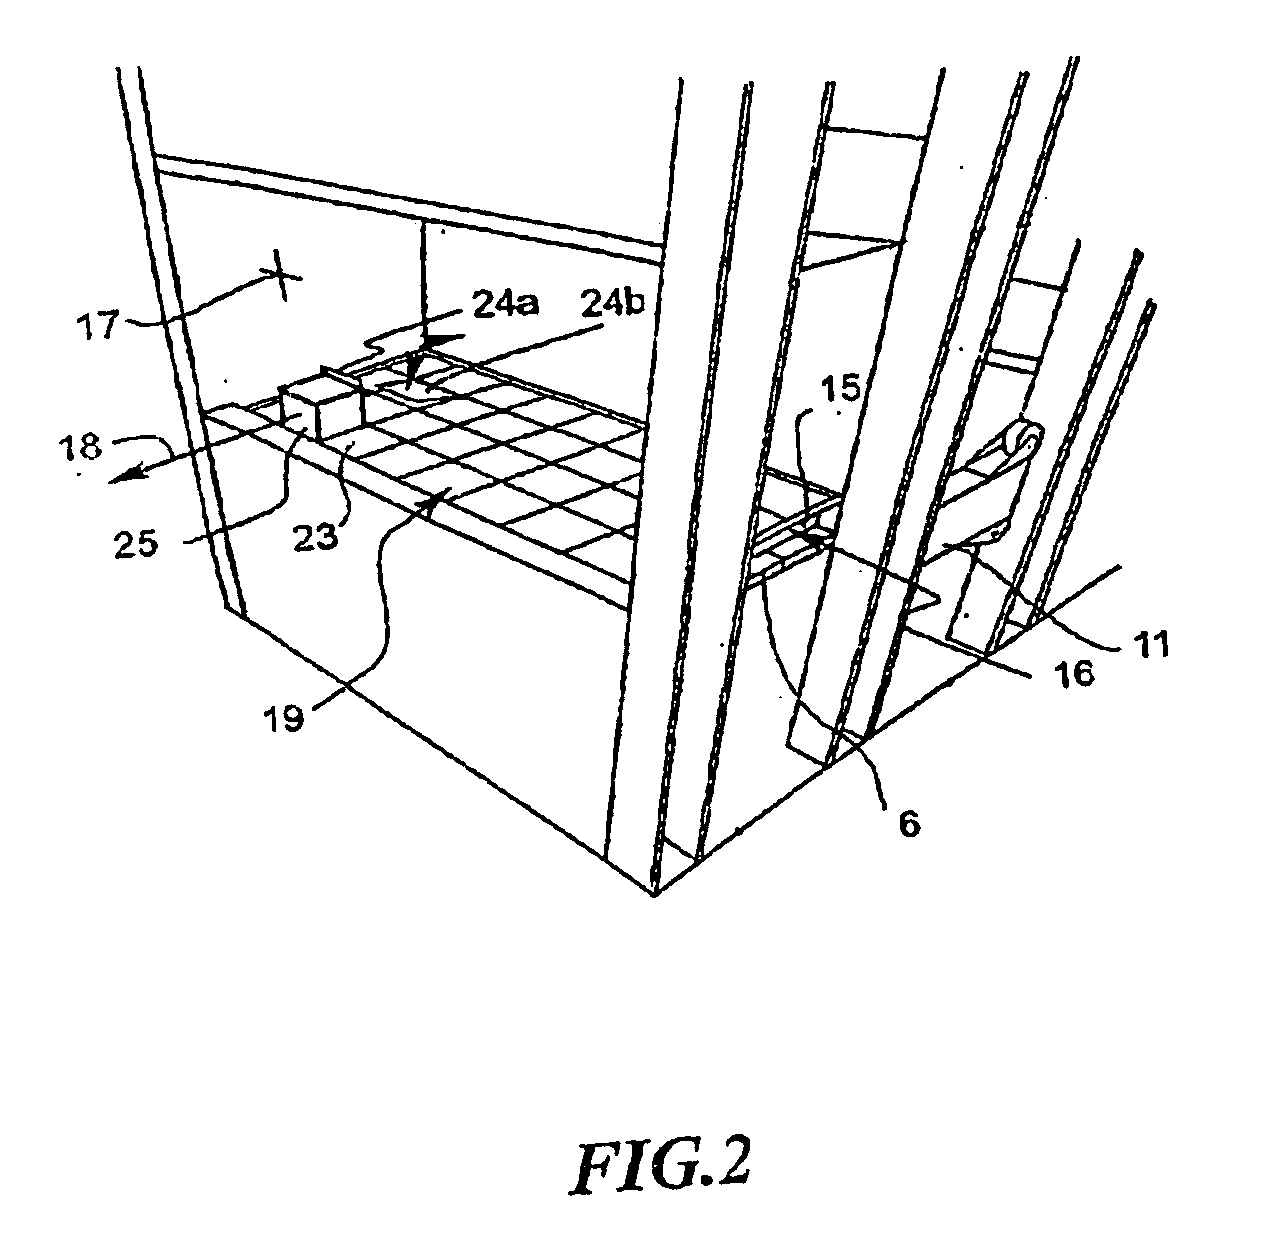 Storage system with access control system